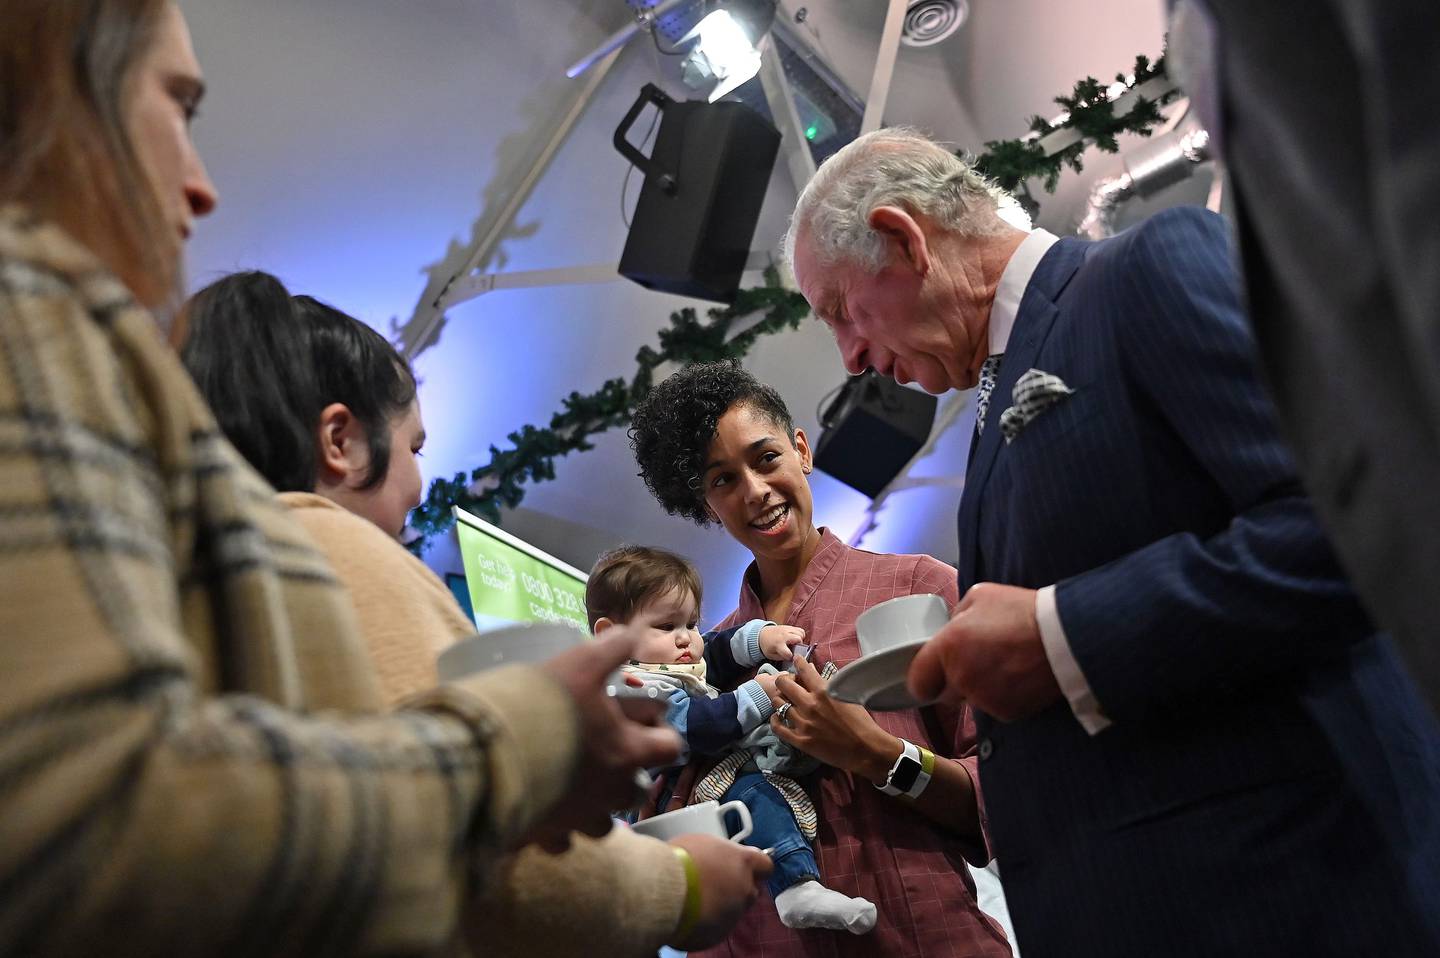 Royal duties continued on Thursday morning, as King Charles III visited King's House, a community hub in King's Cross, north London. PA